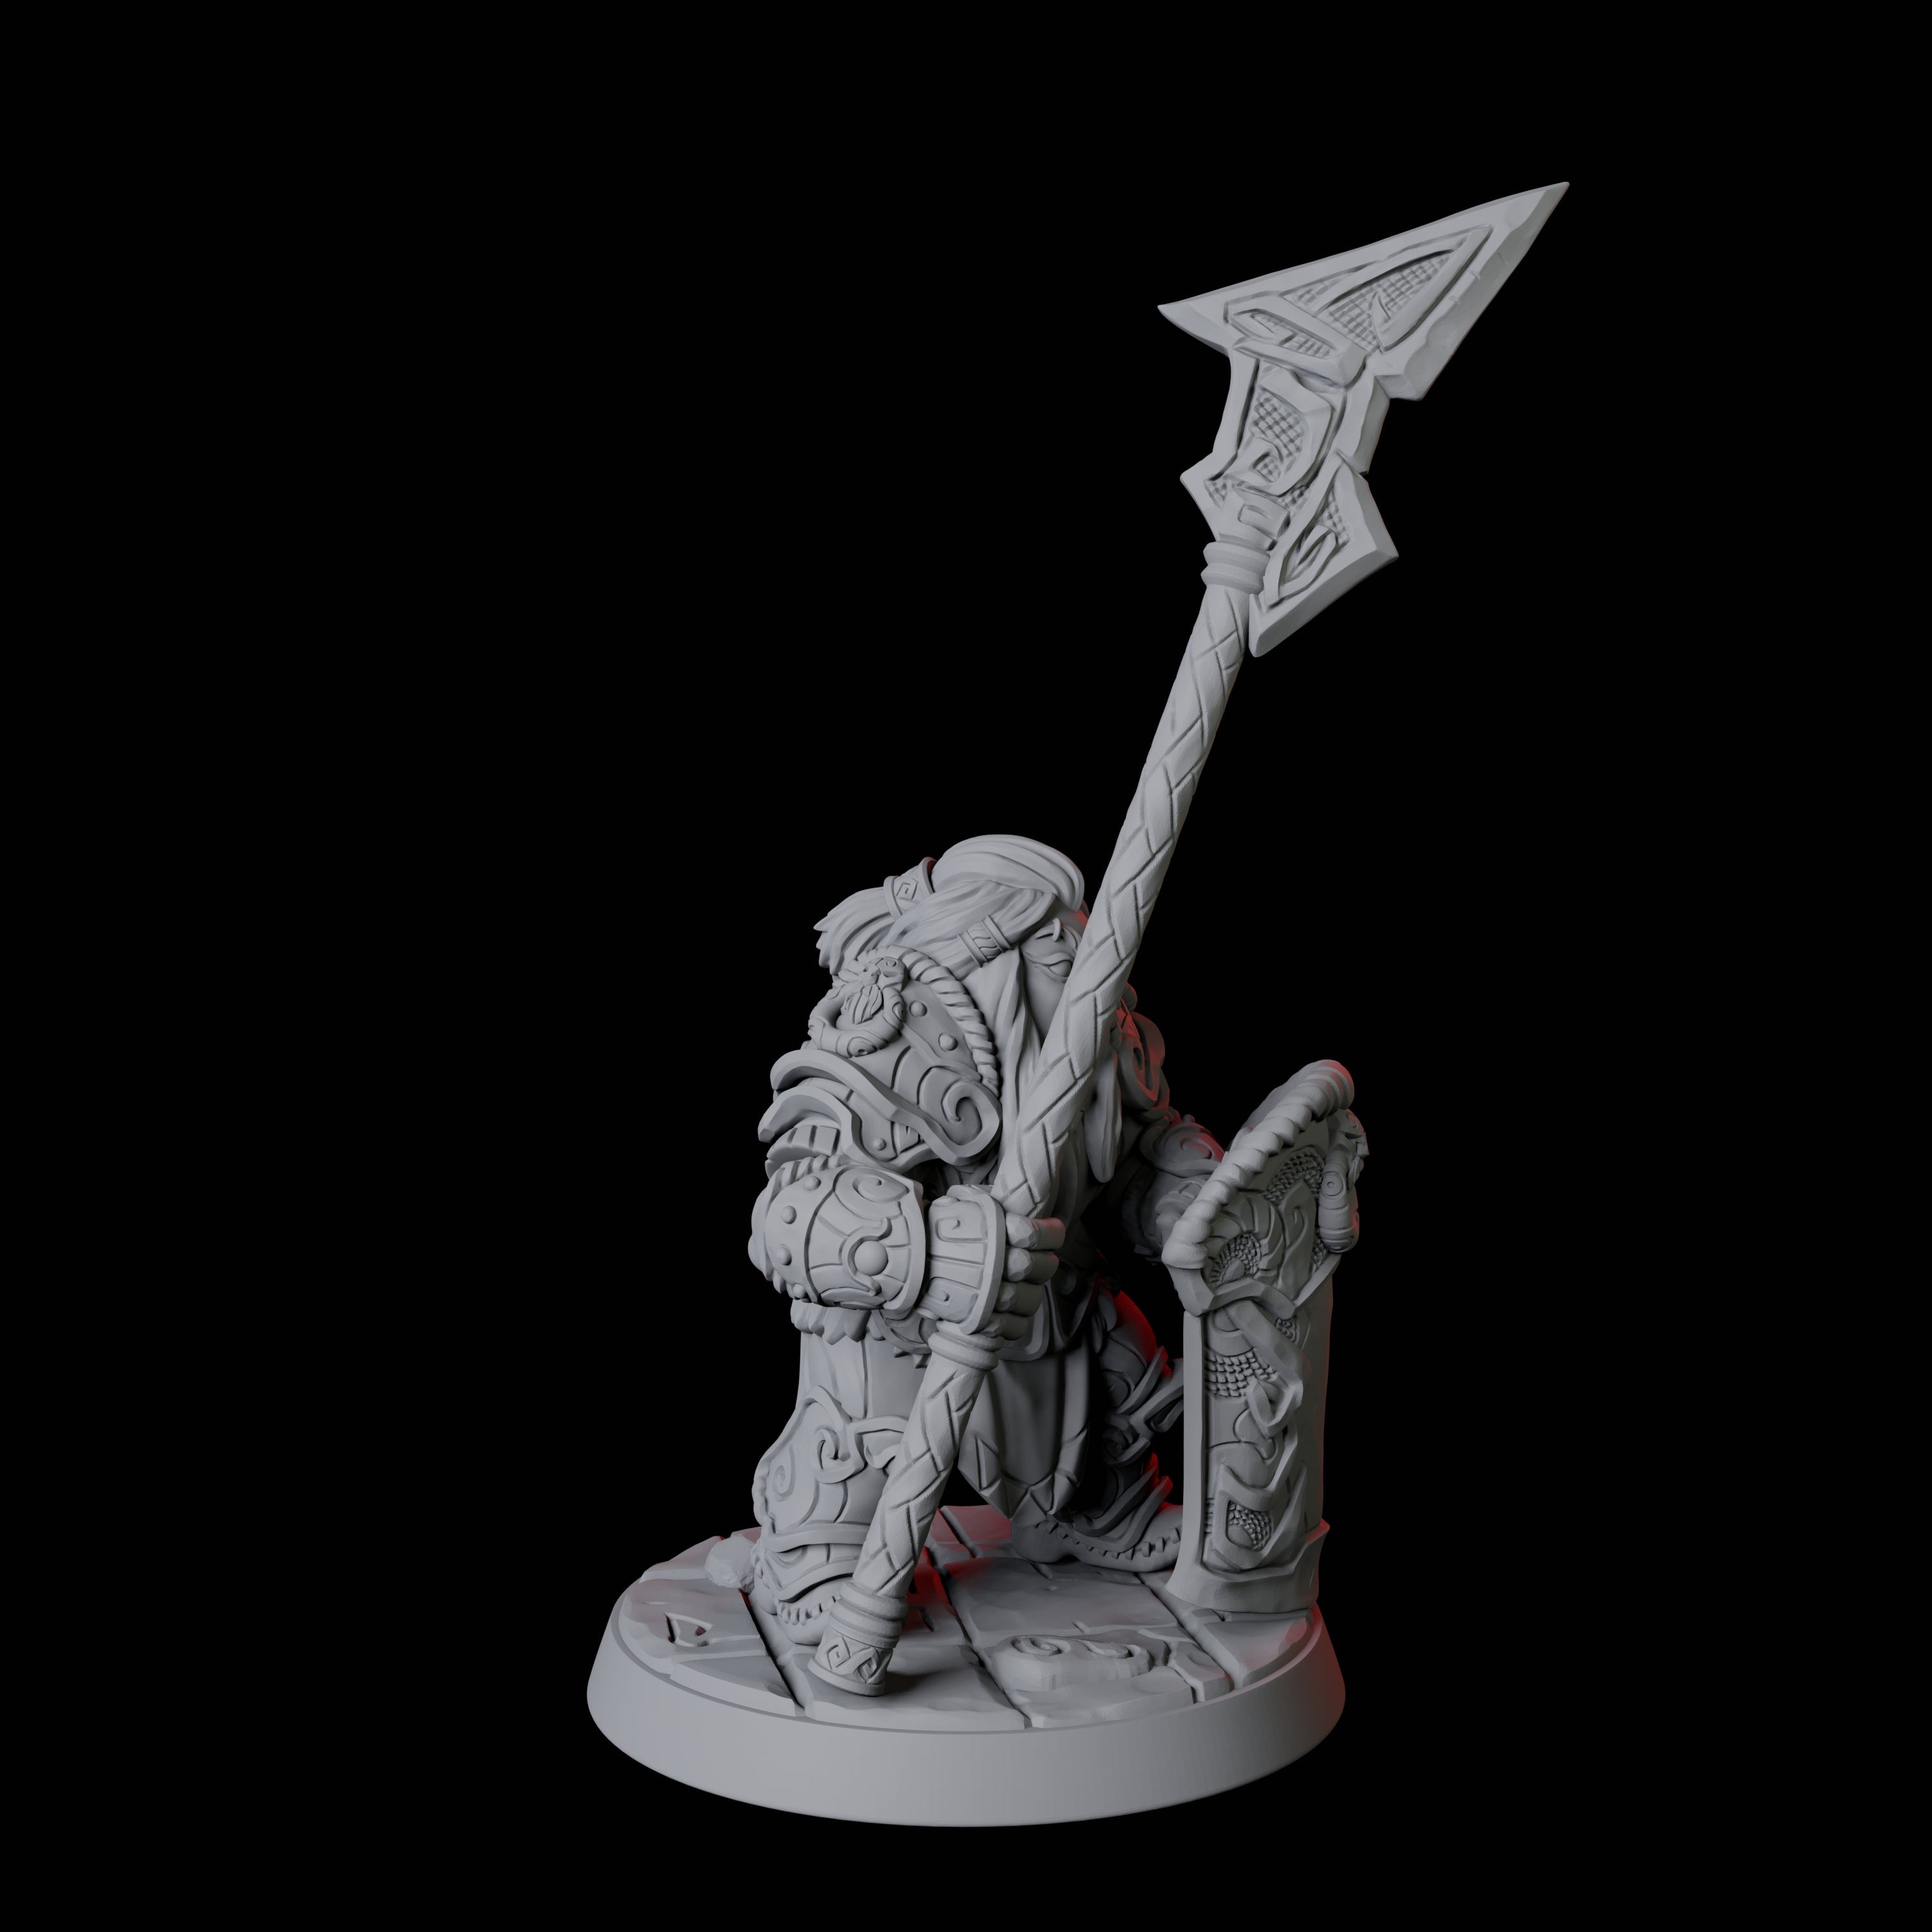 City Guard Dwarf F Miniature for Dungeons and Dragons, Pathfinder or other TTRPGs